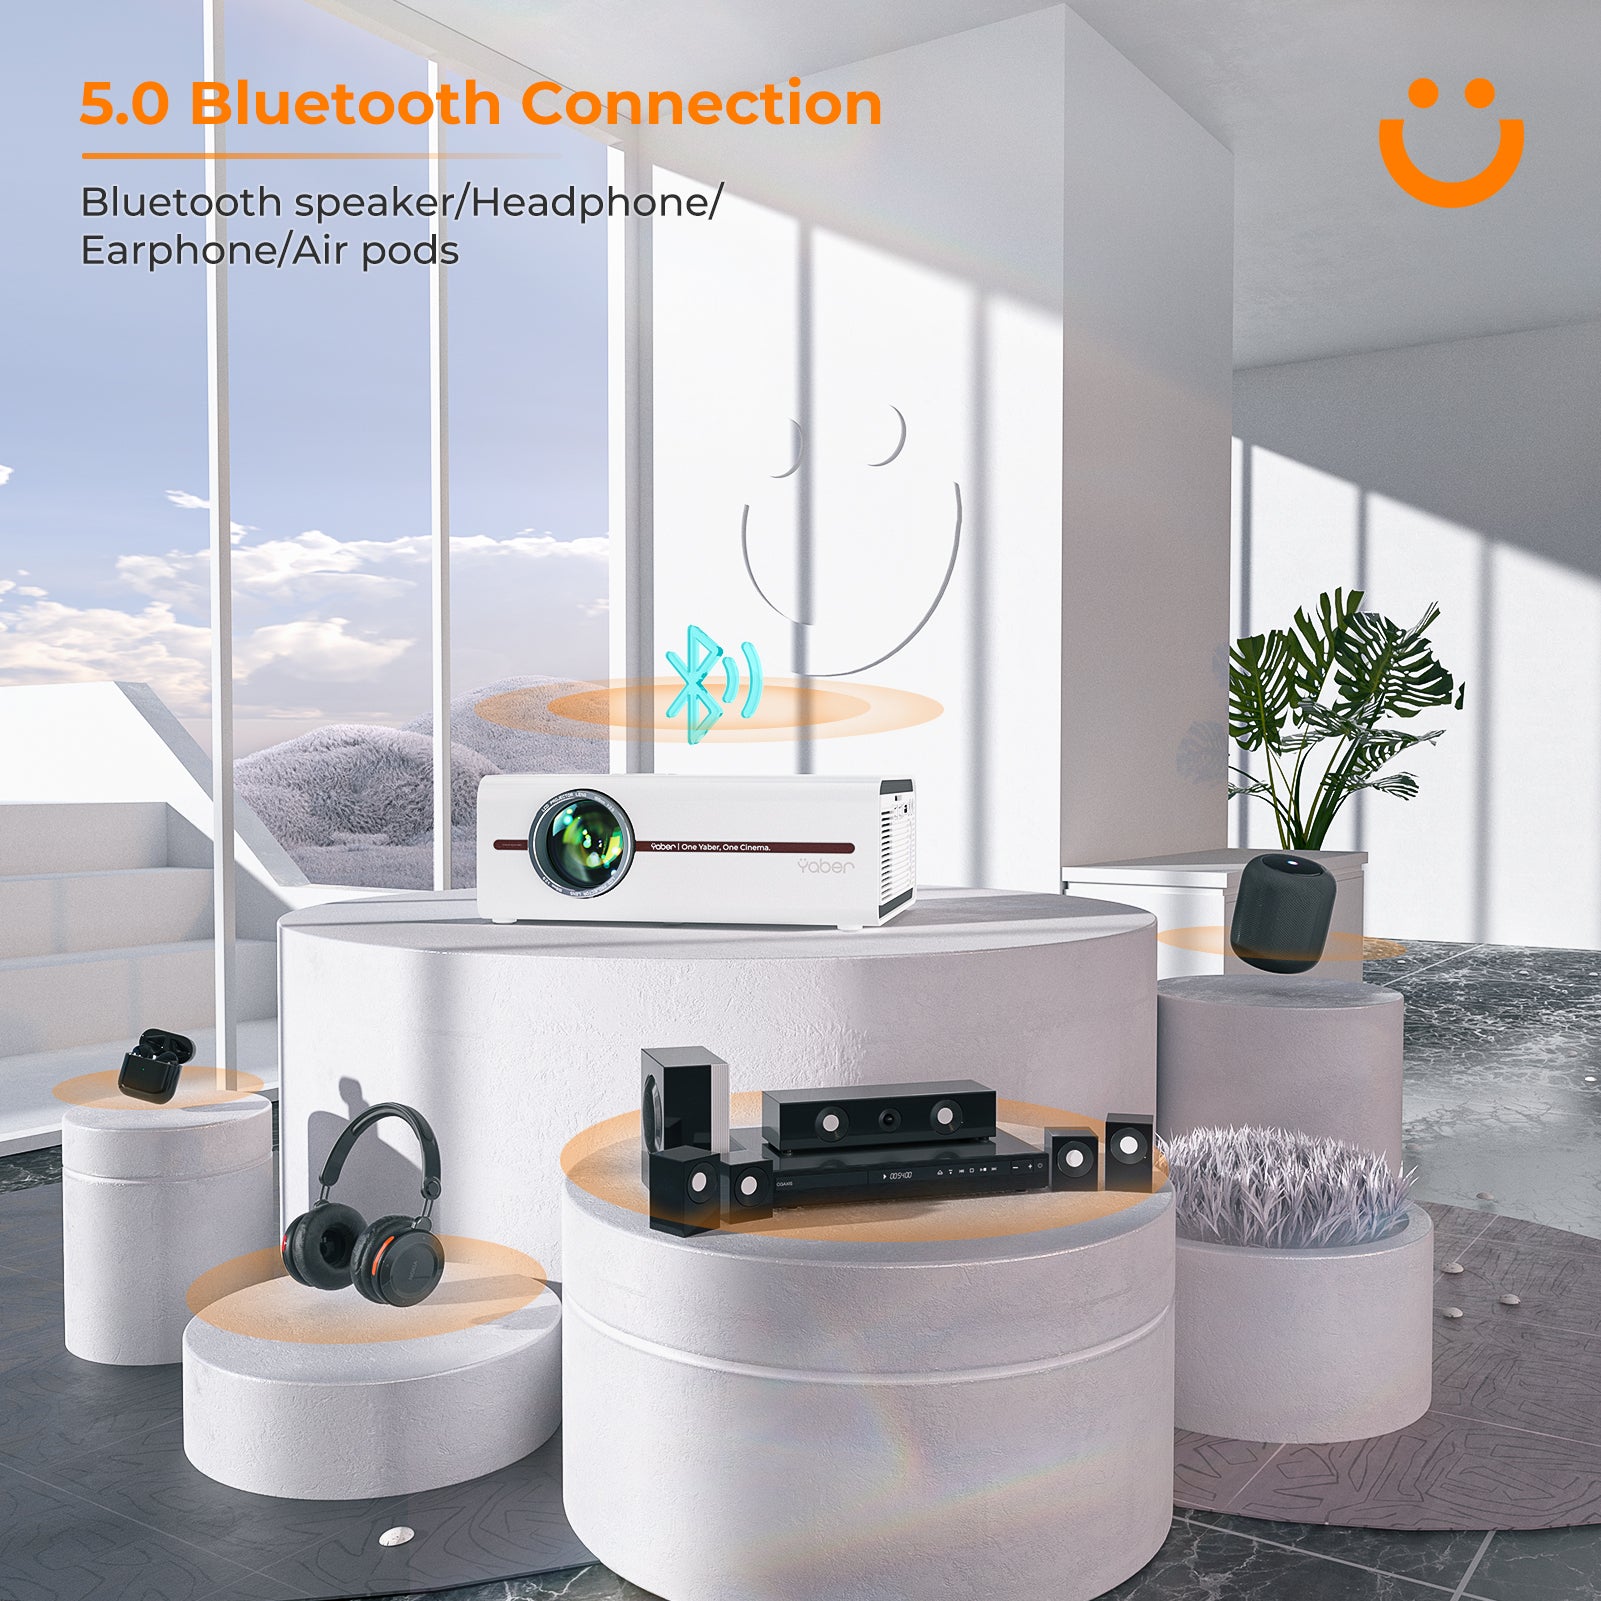 V5 portable projector built-in the newest Bluetooth chip which can easily connect bluetooth, headphones, or other audio equipment. With 5W Hi-Fi stereo surround dual speakers, whether using it indoors or outdoors, the powerful speakers give you an immersive experience.